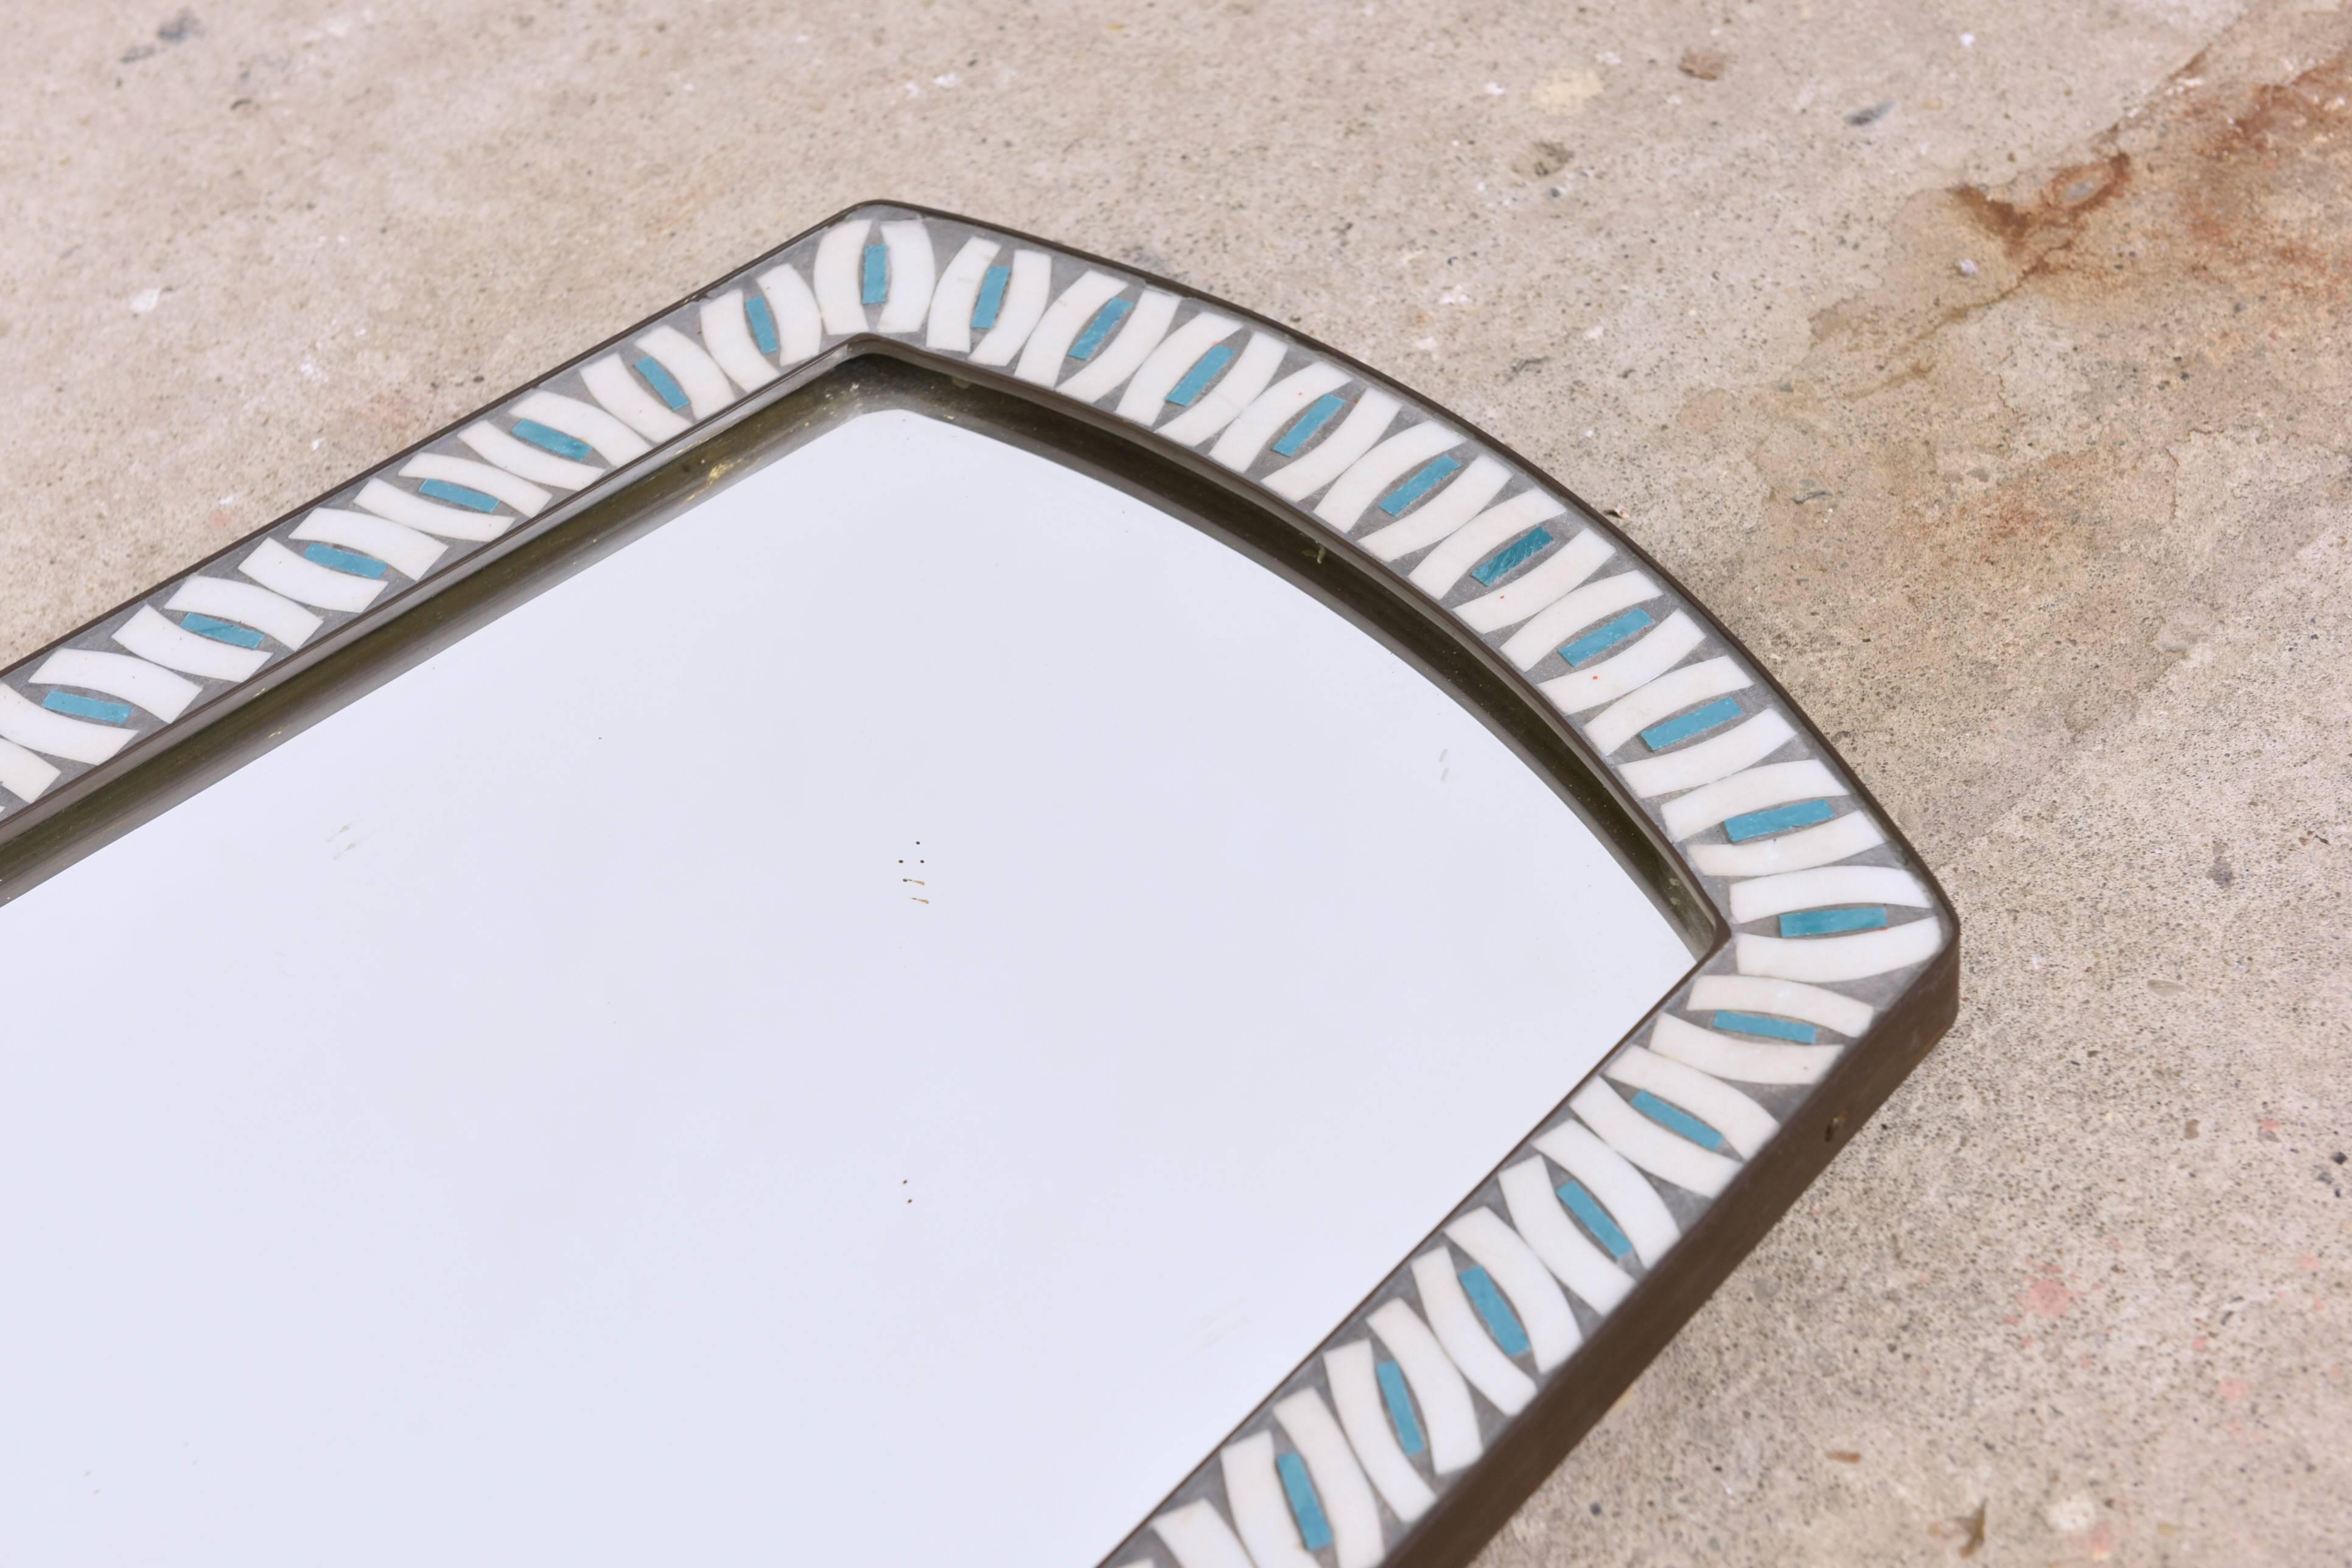 Beautiful large mosaic mirror from the 1960s. 
The mirror has blue and white color glass mosaic in a brass frame.